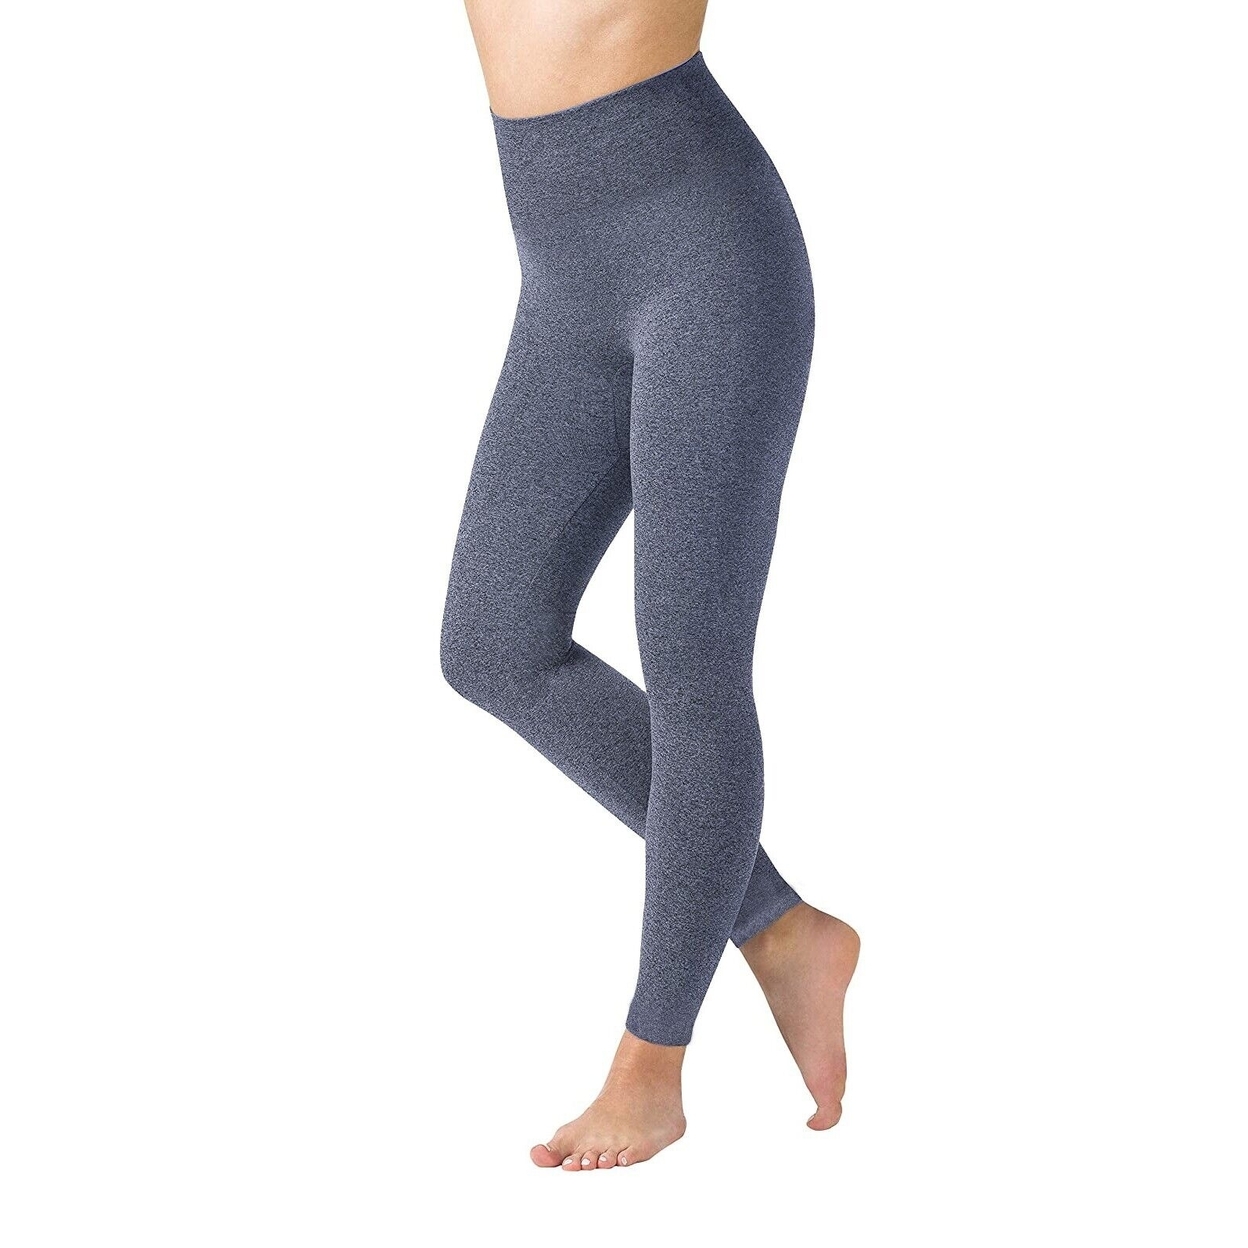 Multi-Packs Women High Waisted Fleece Lined Marled Leggings Ultra Soft Warm Pant - Charcoal/navy, 1, Large